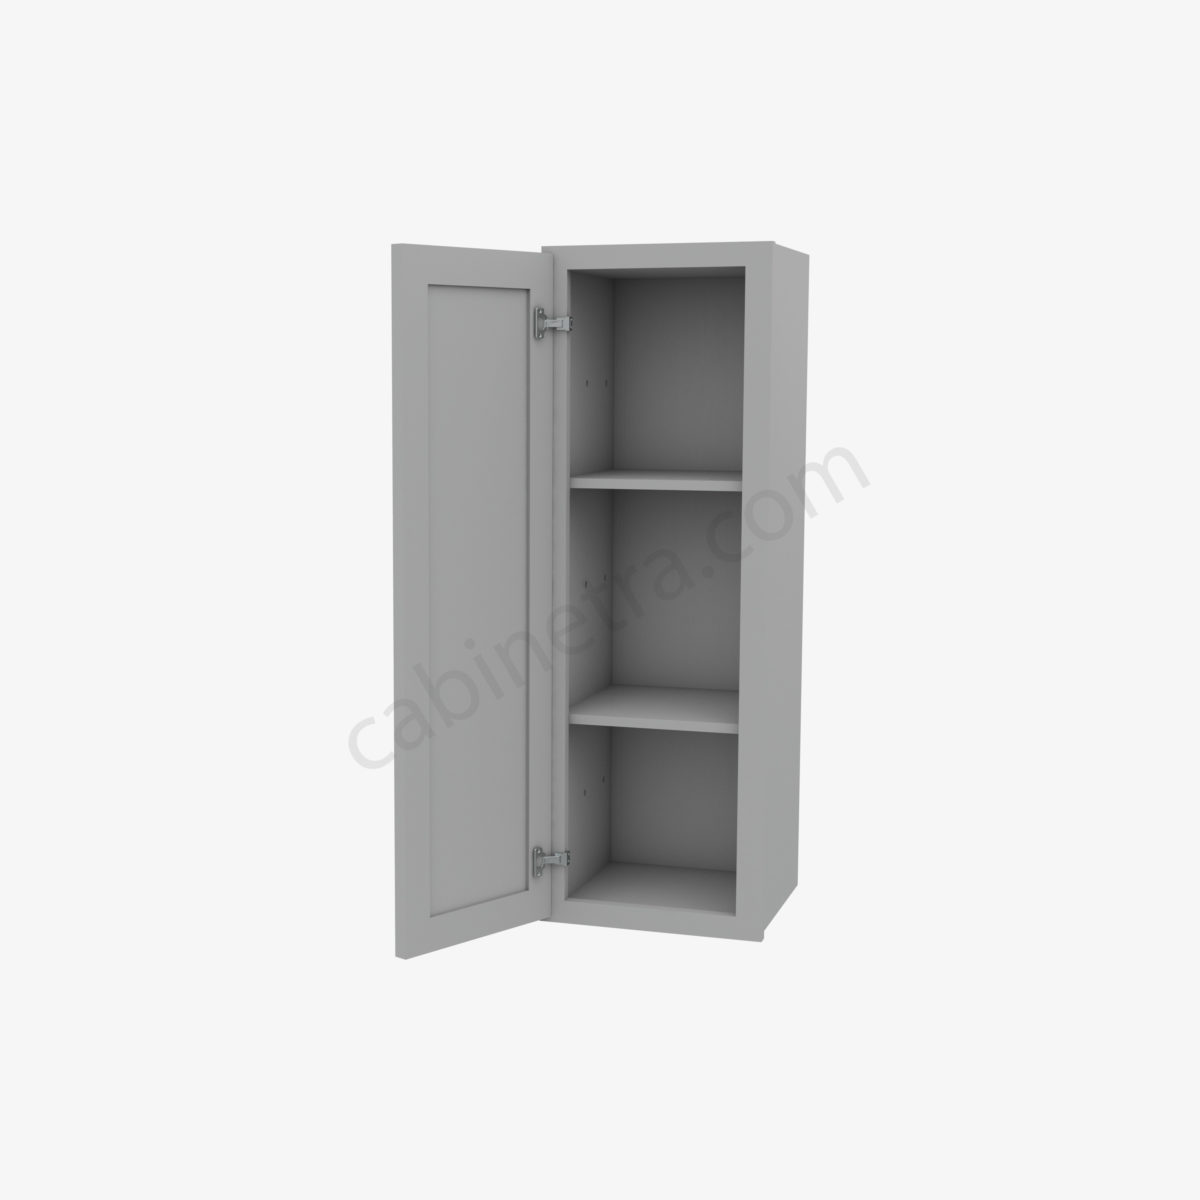 AB W1236 5 Forevermark Lait Gray Shaker Cabinetra scaled